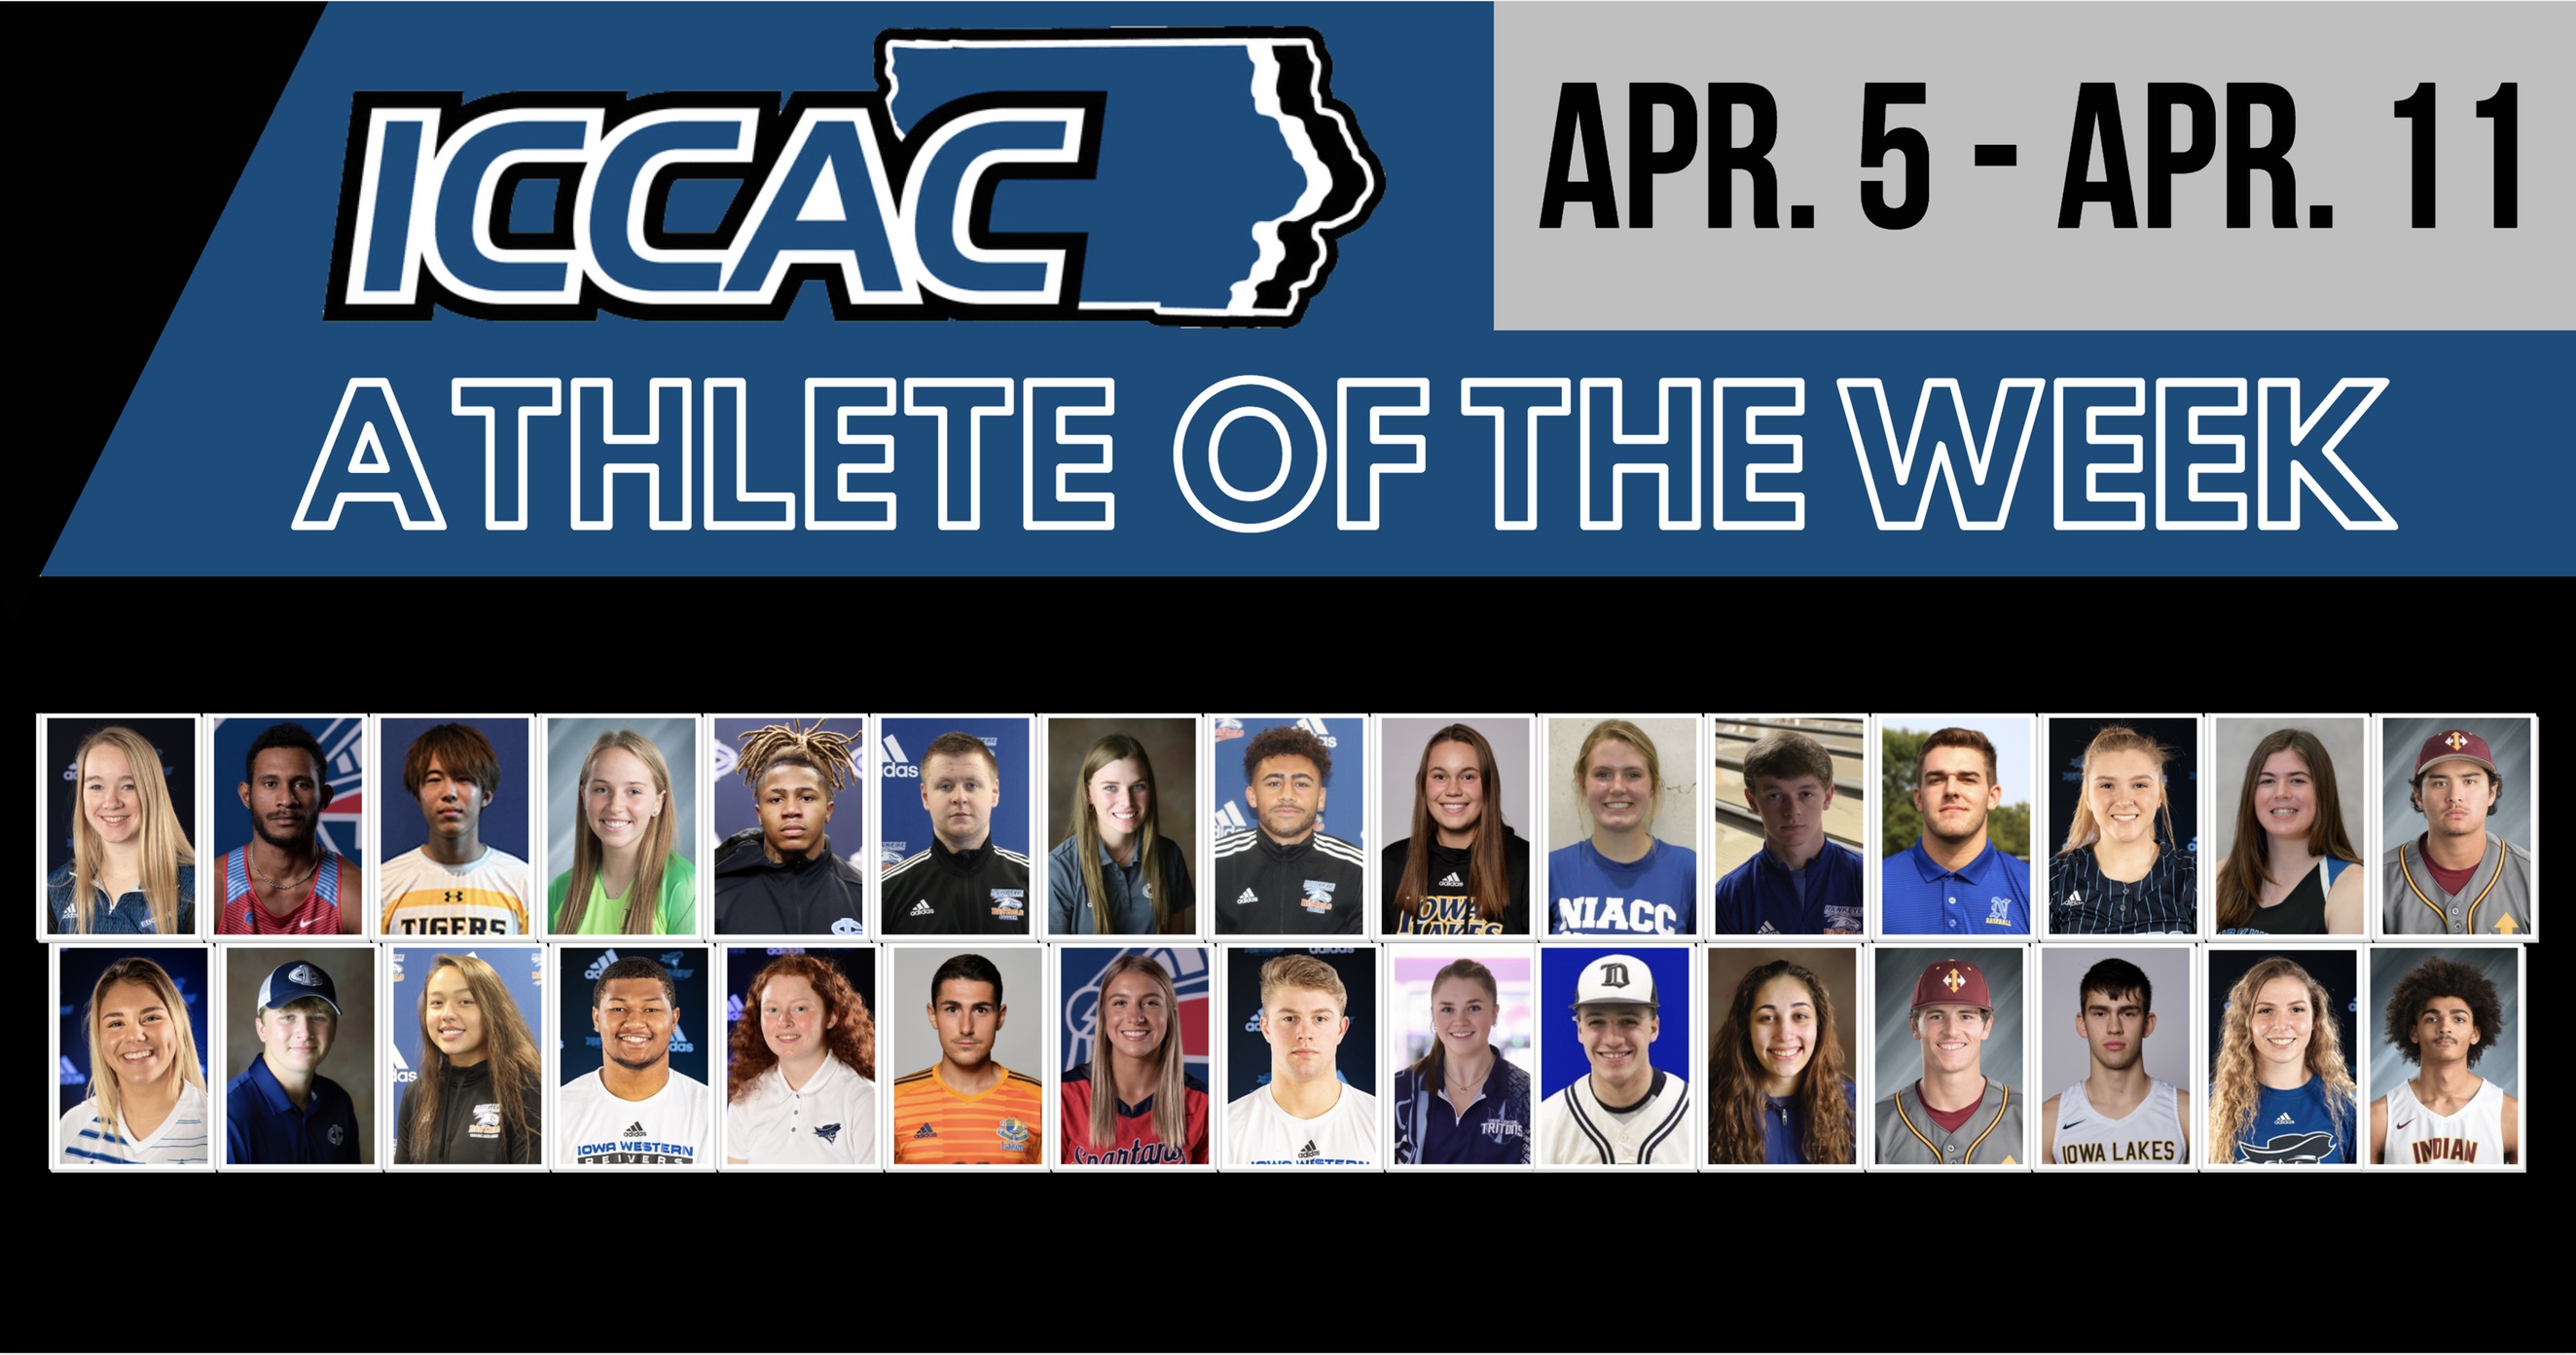 Hure and Shwaluk Earn ICCAC Athlete of the Week